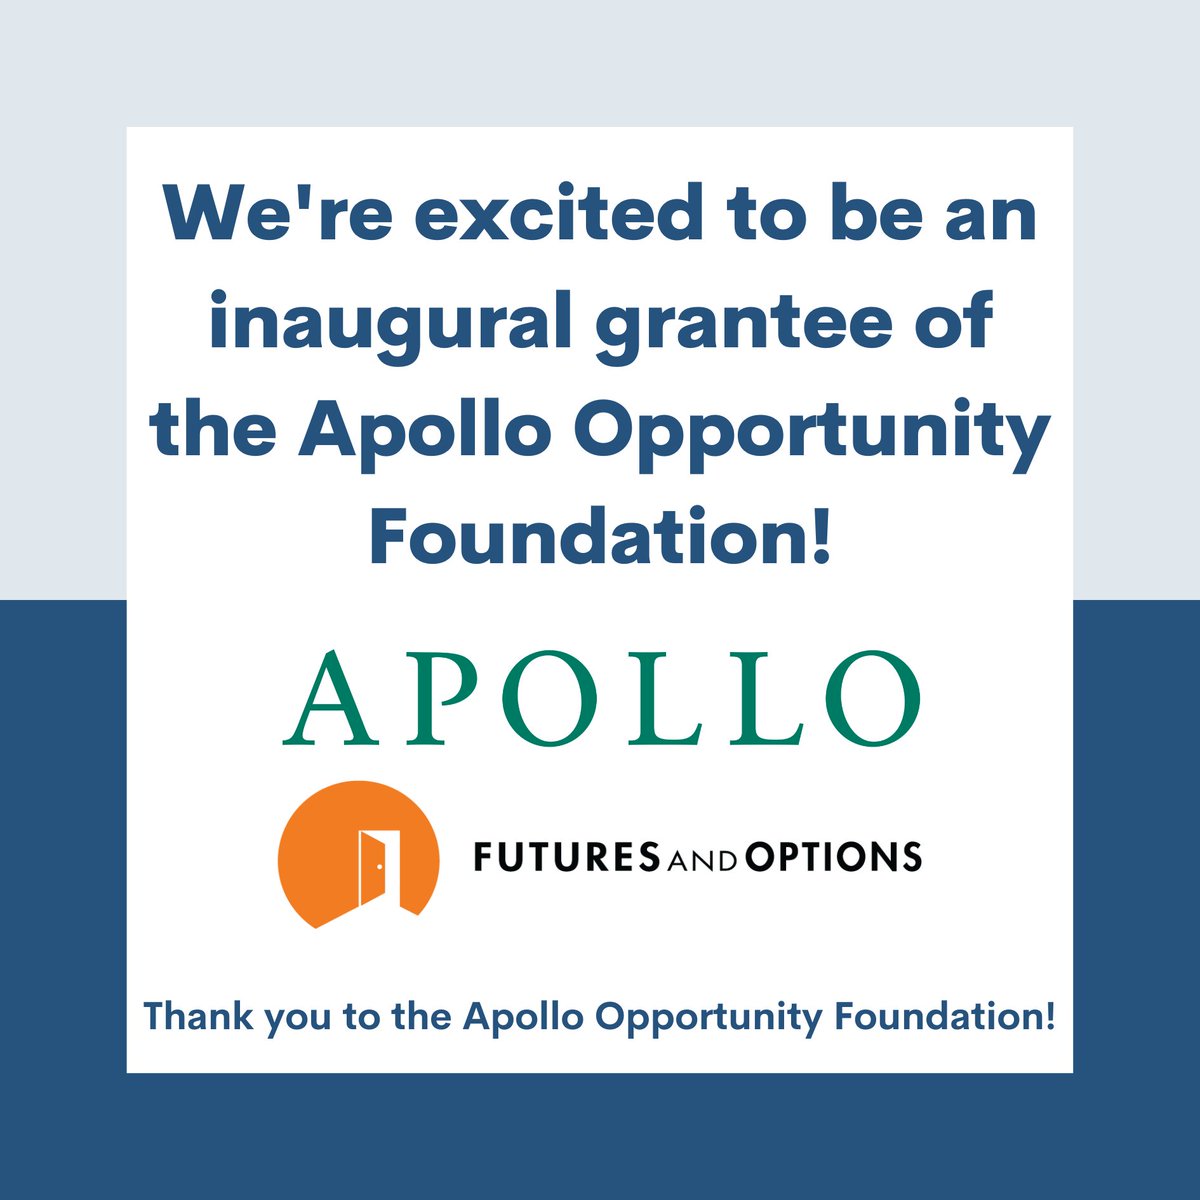 We've been awarded a grant by Apollo Global Management’s Apollo Opportunity Foundation to expand career development opportunities for NYC high school youth. Thank you to the Apollo Opportunity Foundation for your generous support of our programs! #ExpandingOpportunity